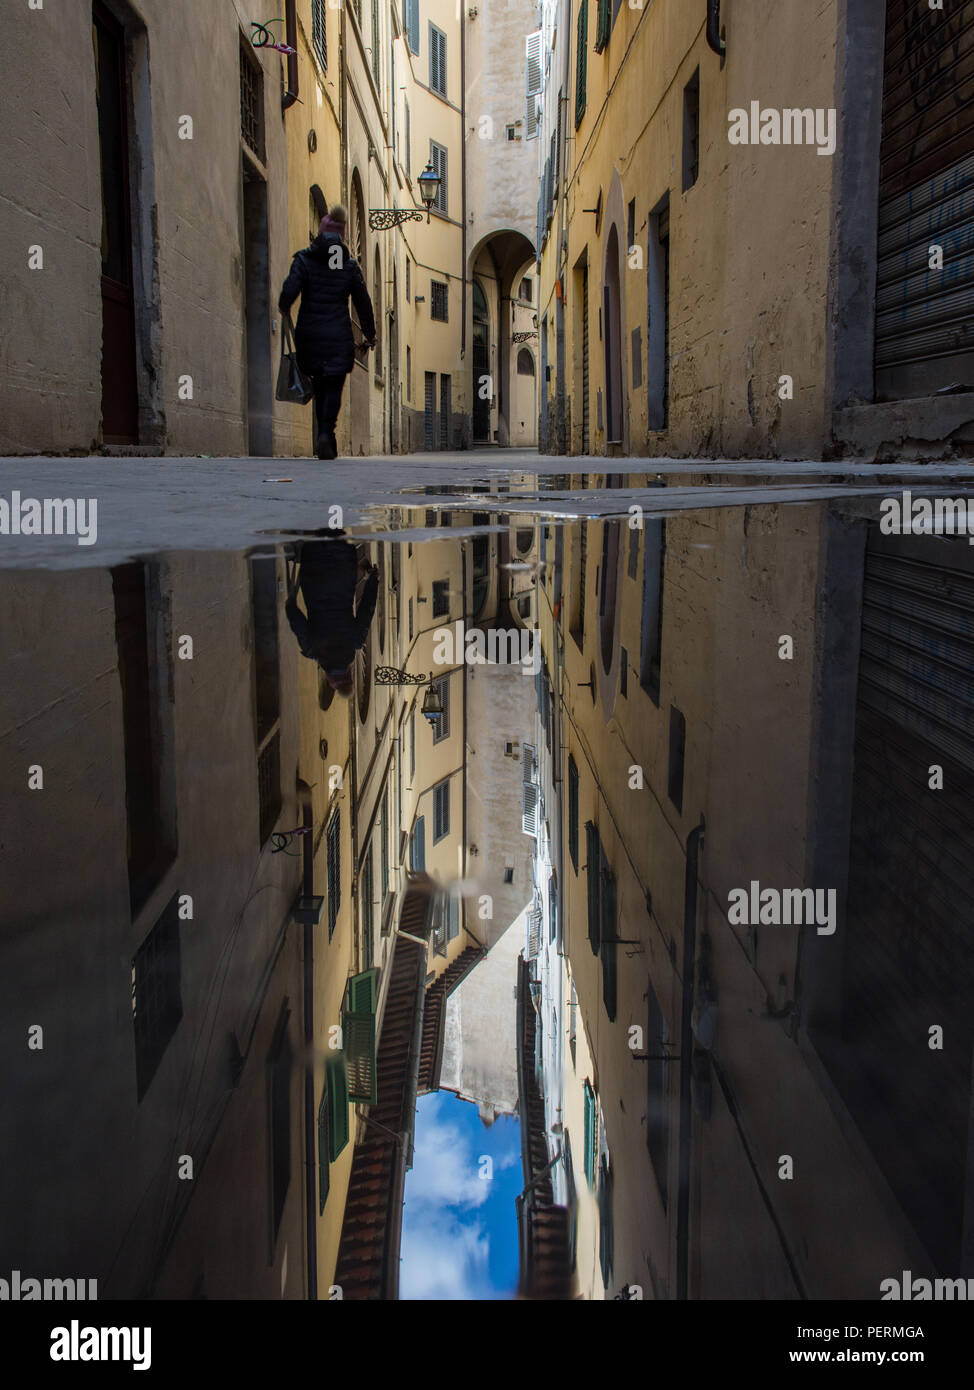 Florence, Italy - March 30, 2018: A pedestrian walks past traditional closely-built Renaissance-era houses reflected in a puddle on a street in Floren Stock Photo